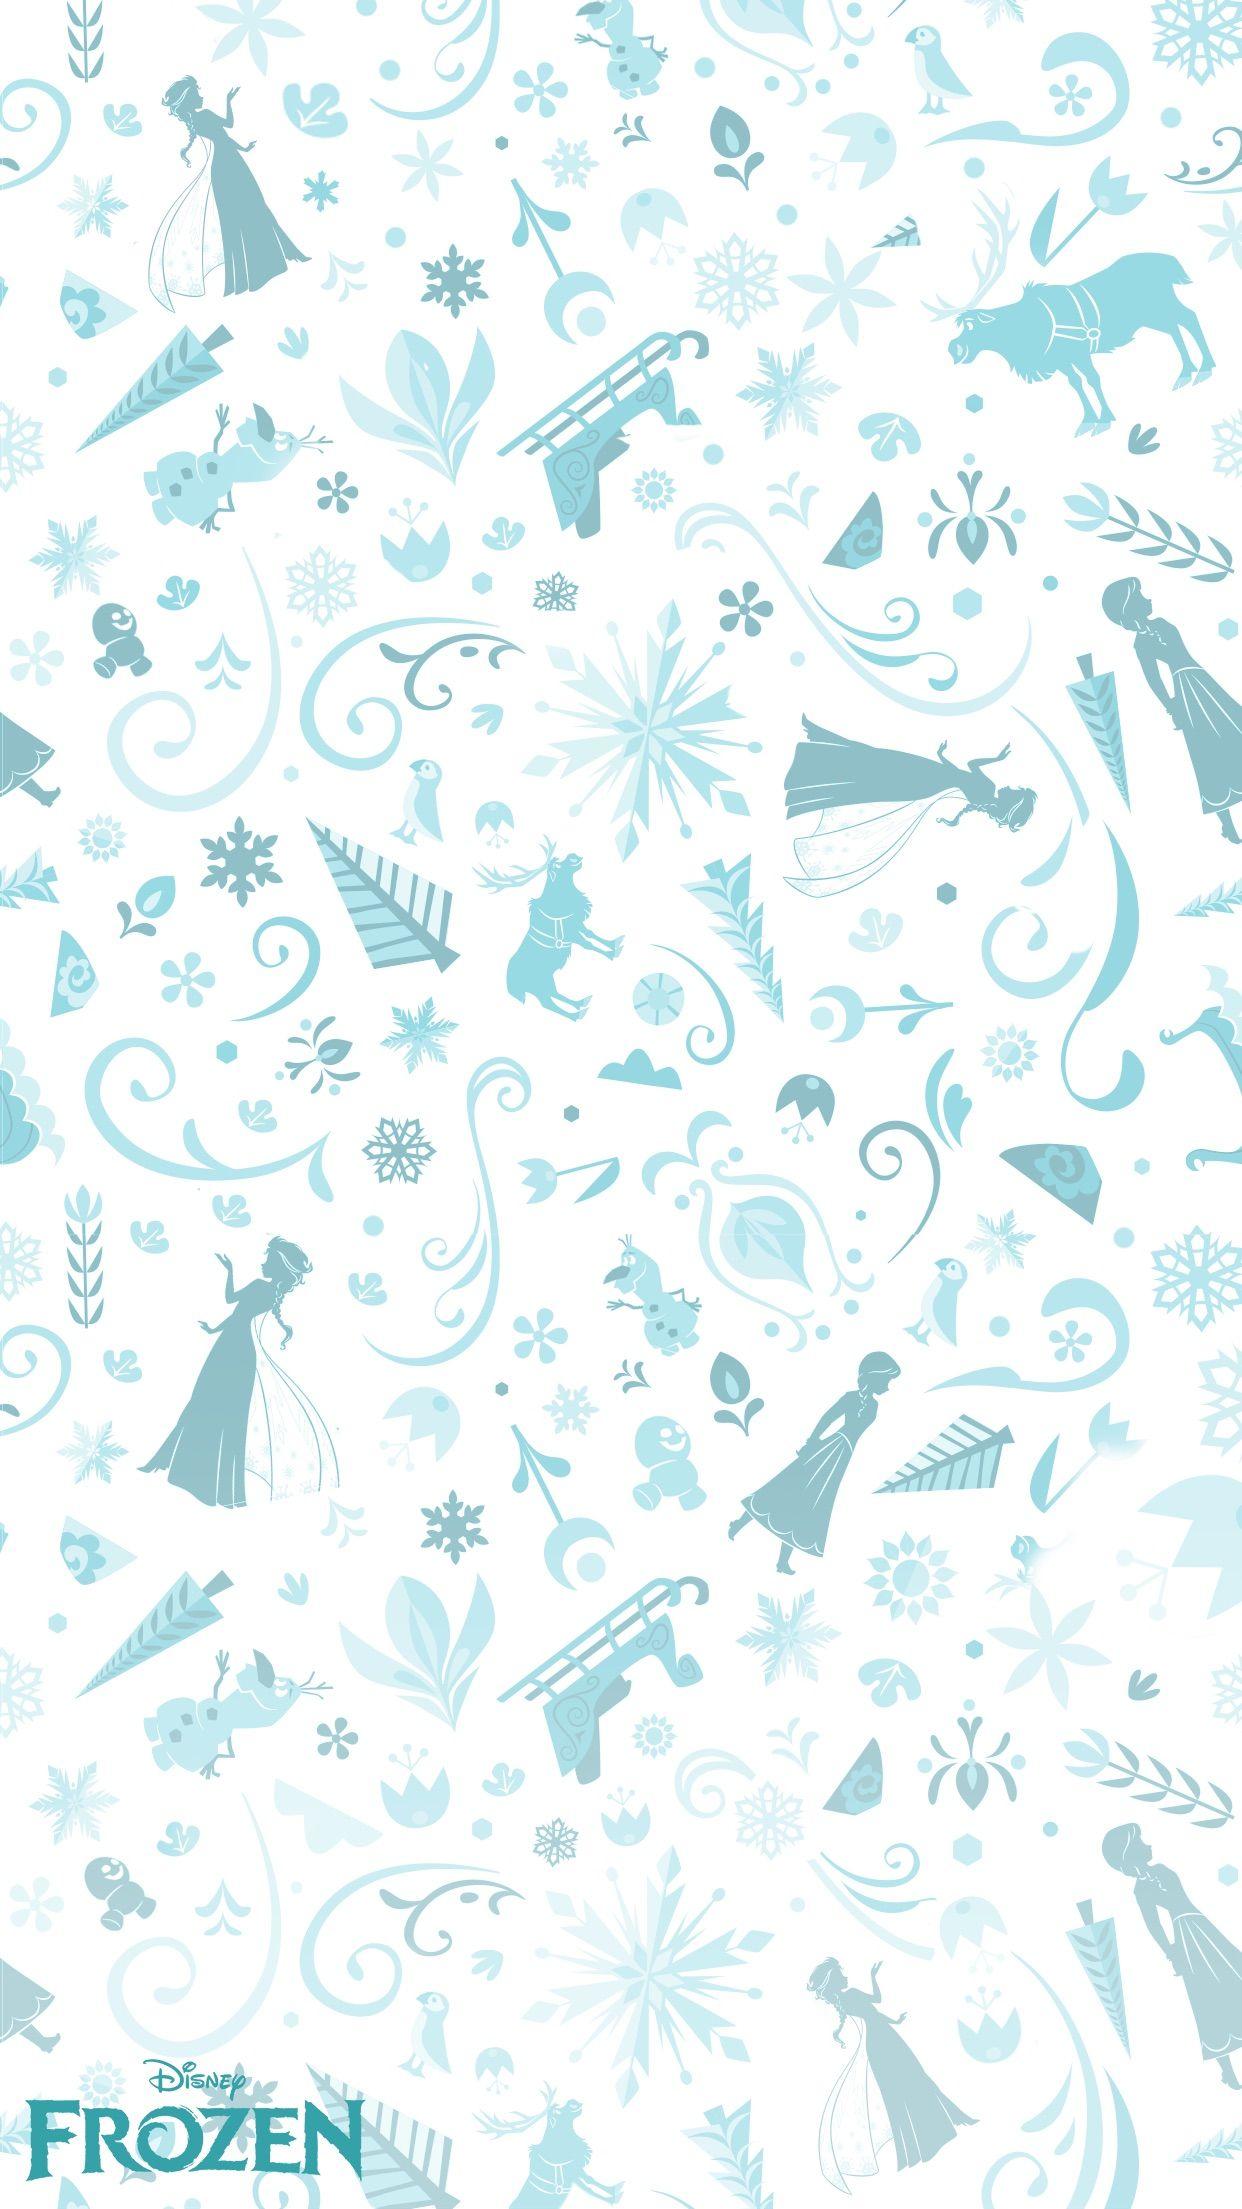 These Frozen Wallpaper Will Definitely Make Your Phone Even Cooler